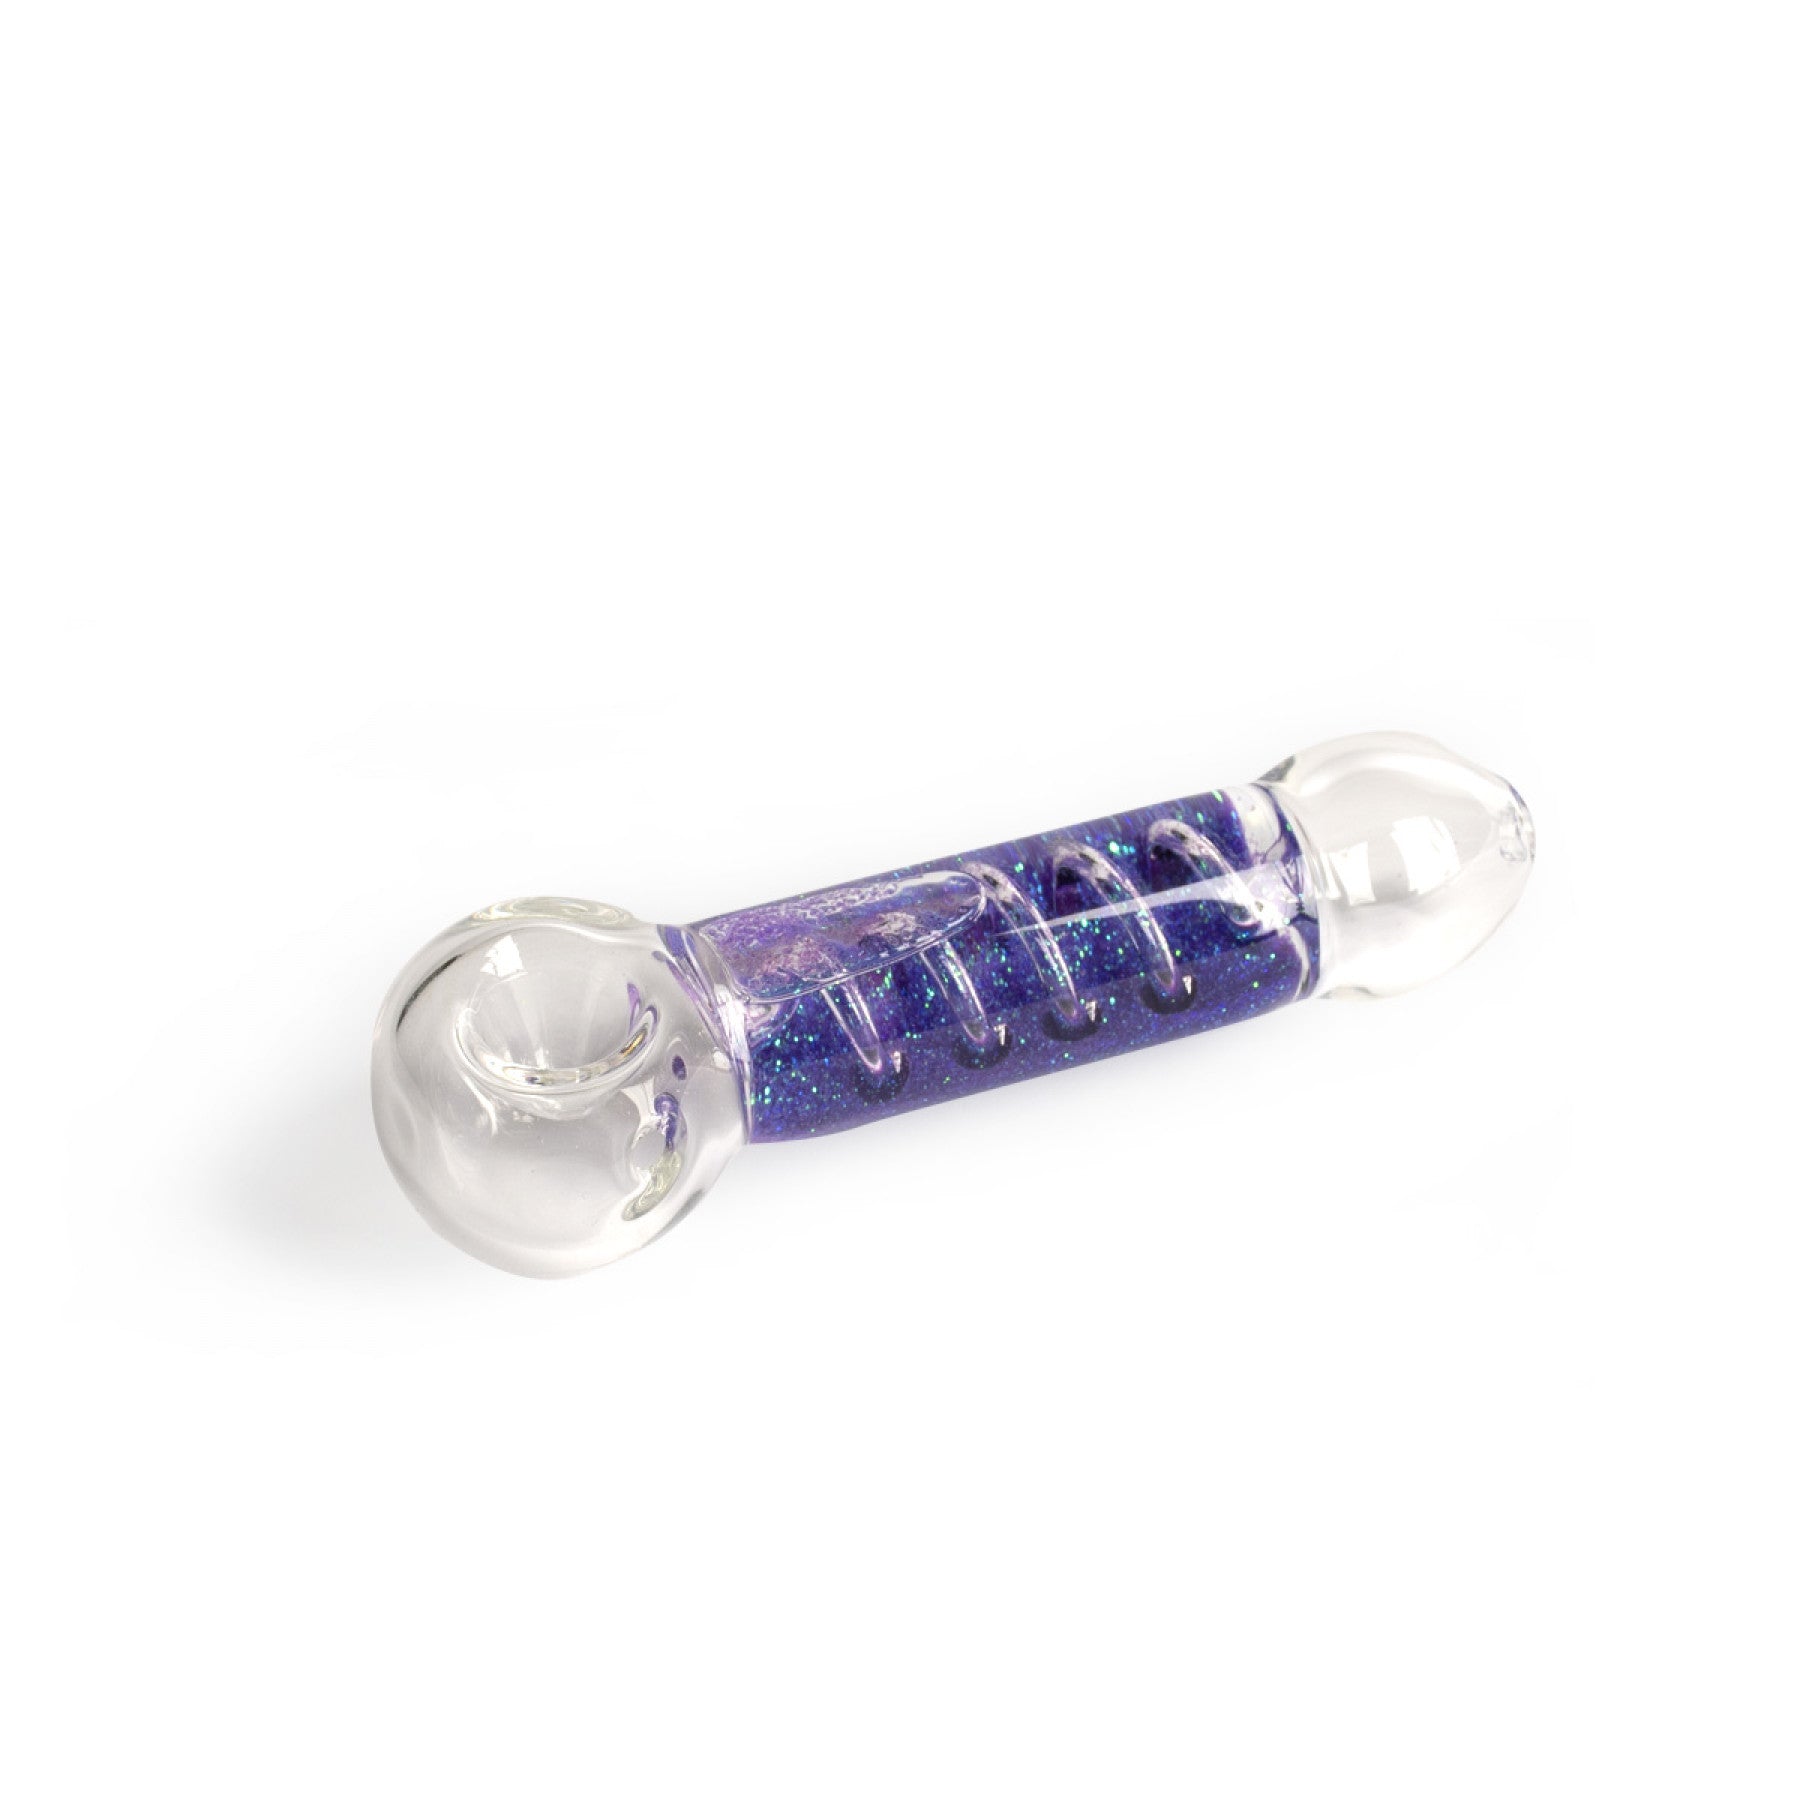 4.5" Sparkle Chiller Coil Hand Pipe